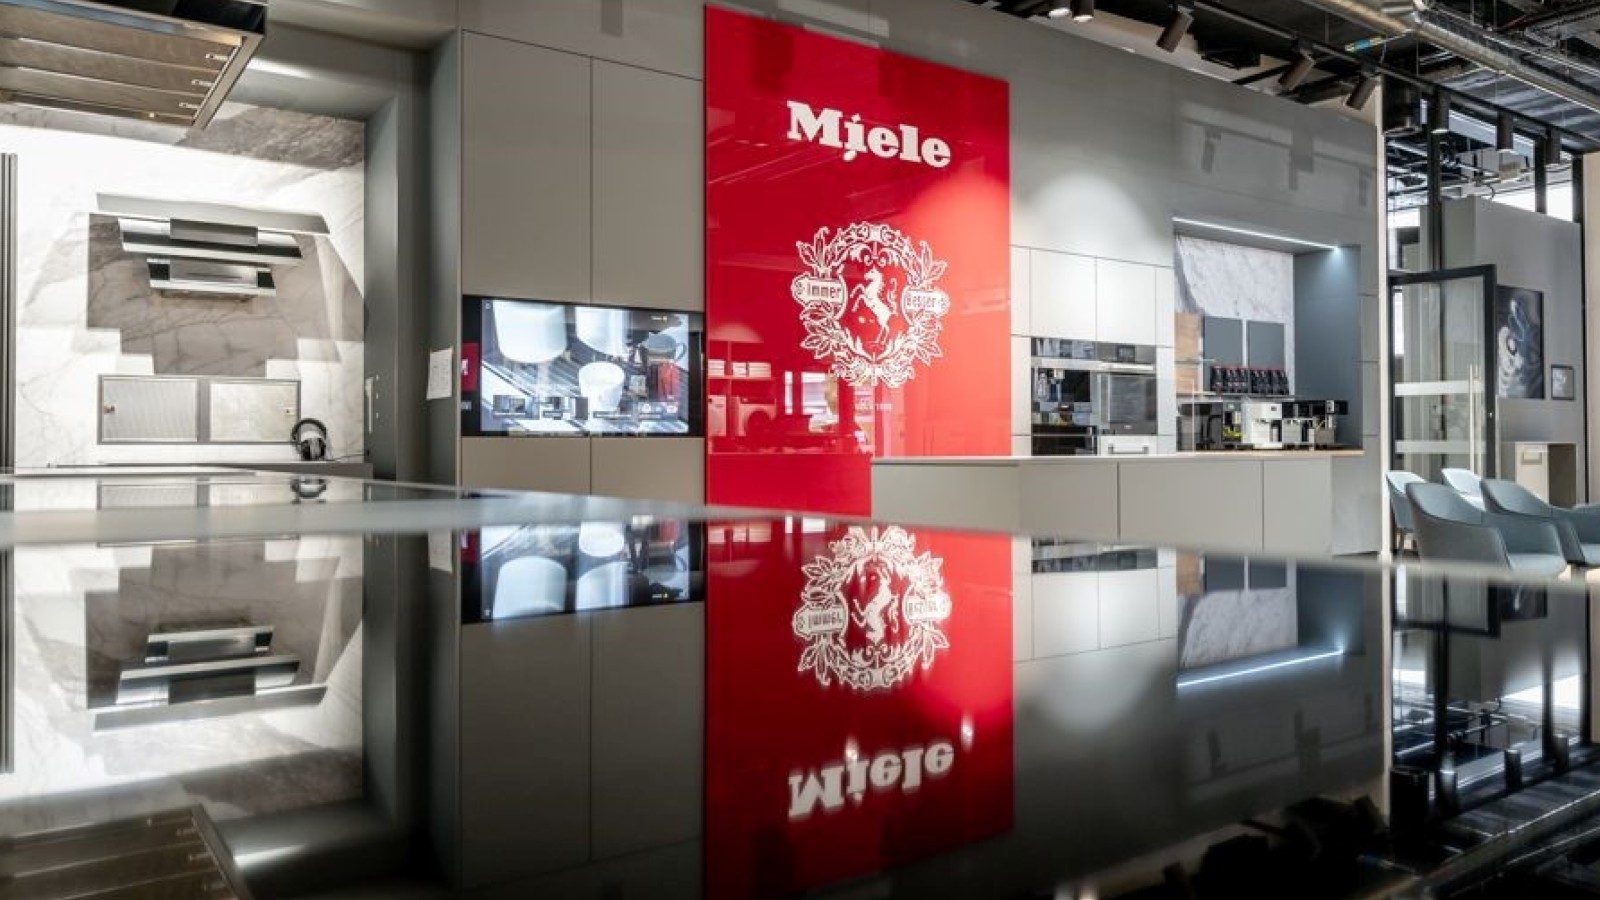 miele-opens-third-experience-centre-kitchens-and-bathrooms-news